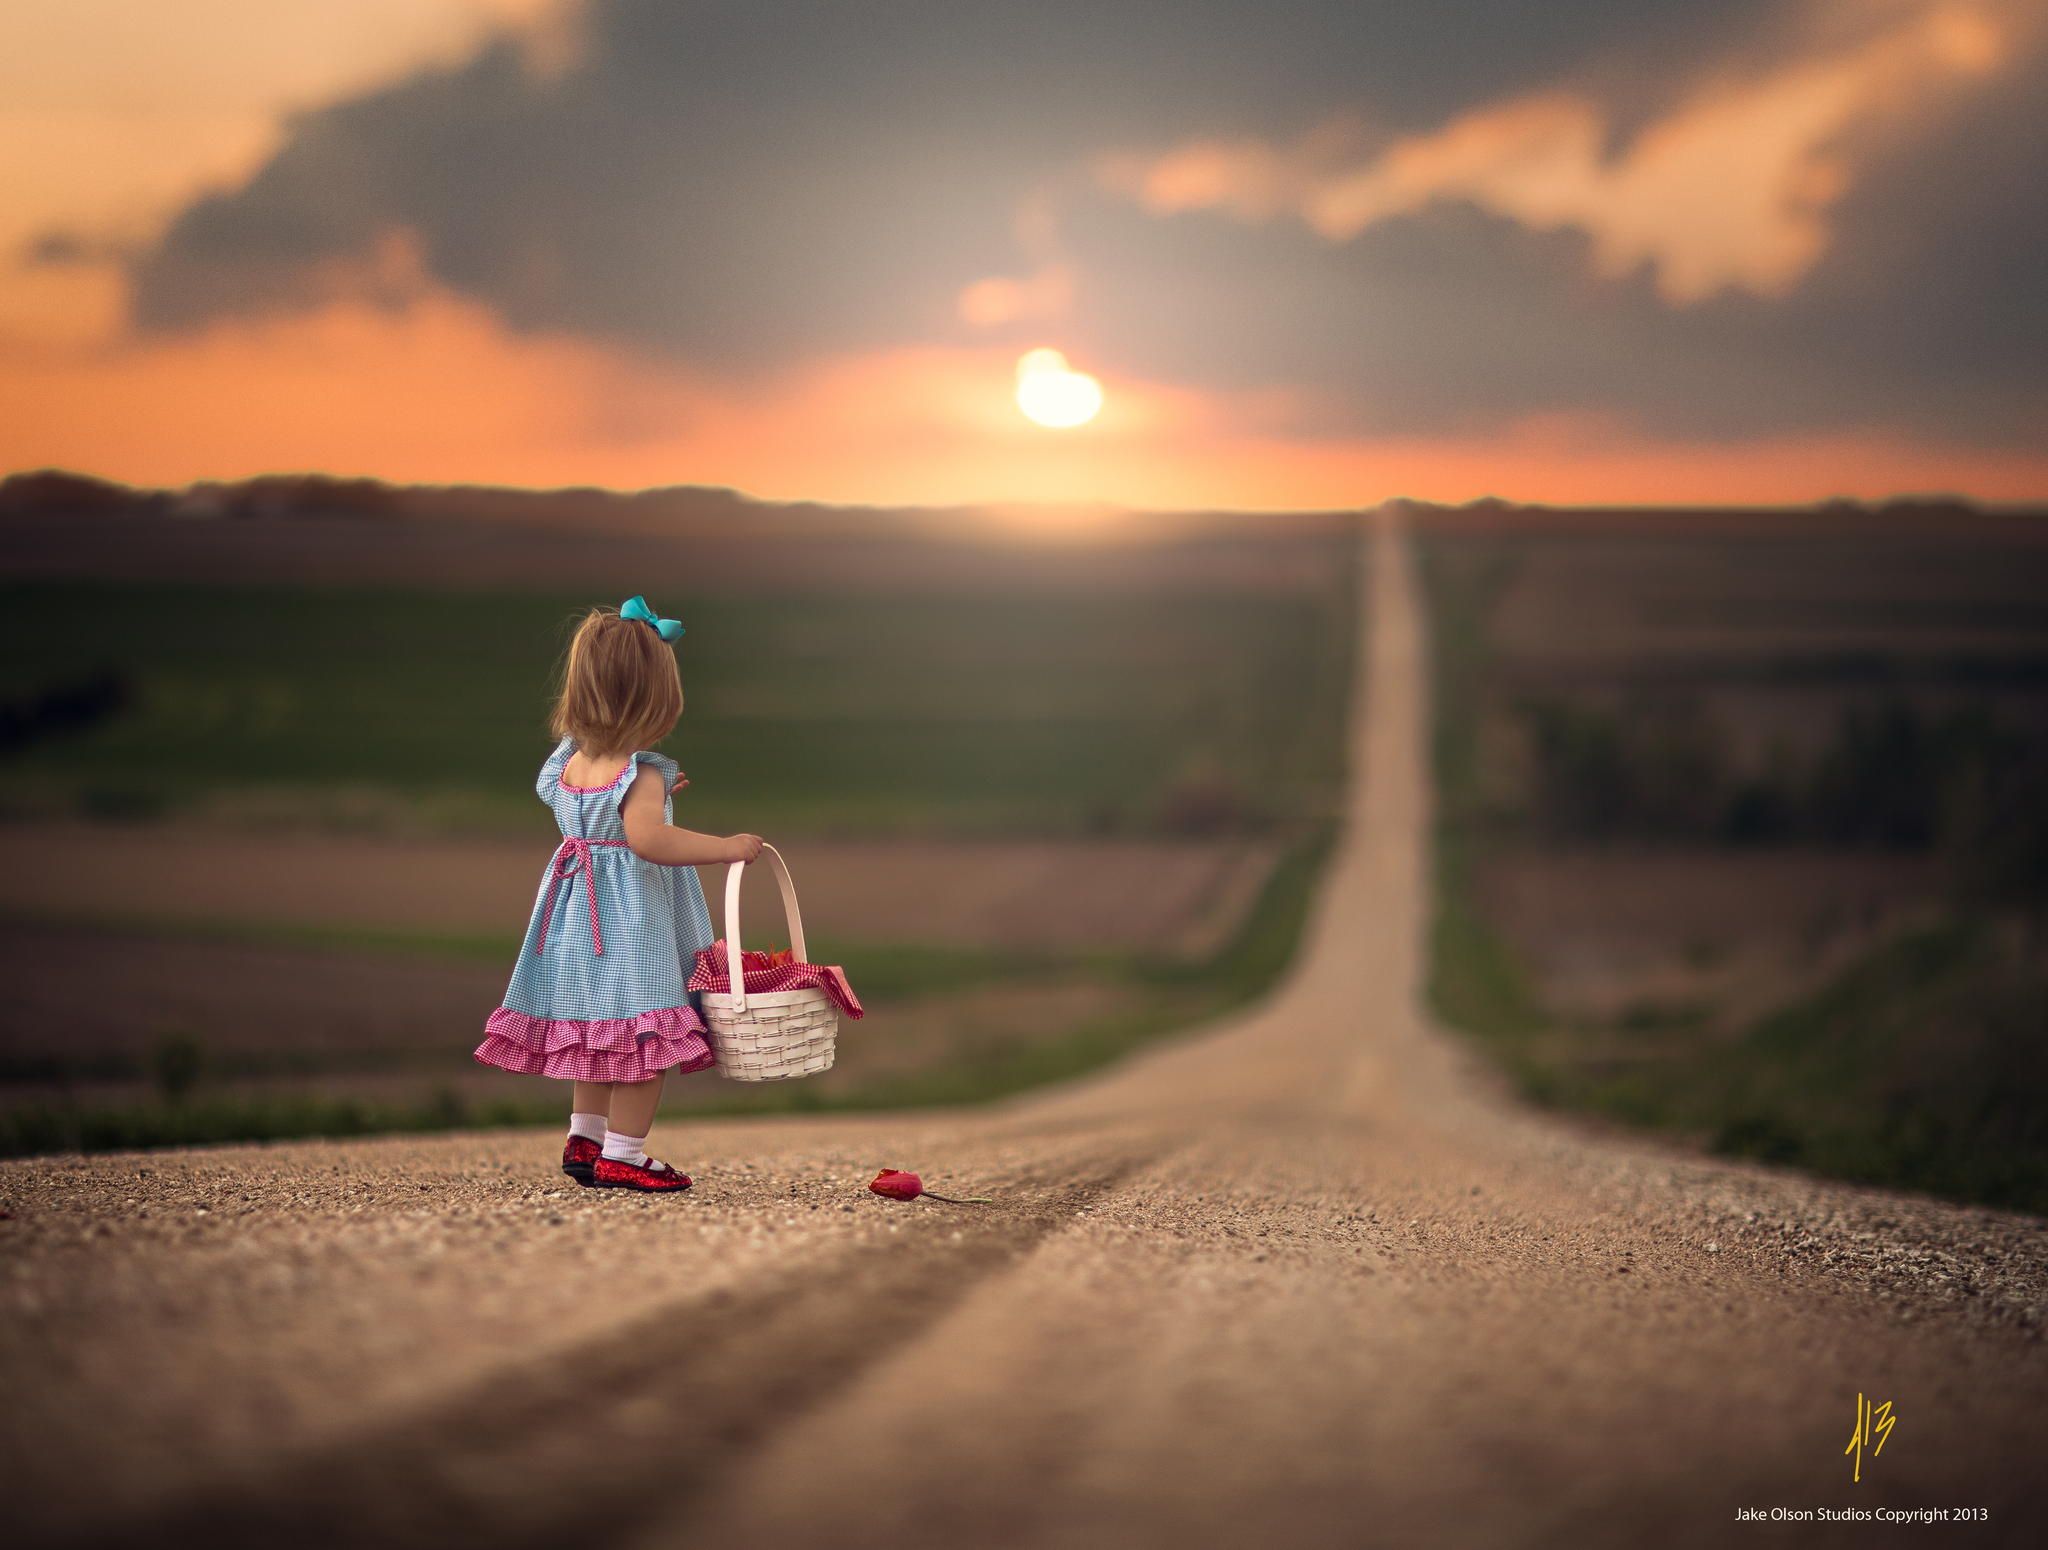 Photograph No Place Like Home by Jake Olson Studios on 500px